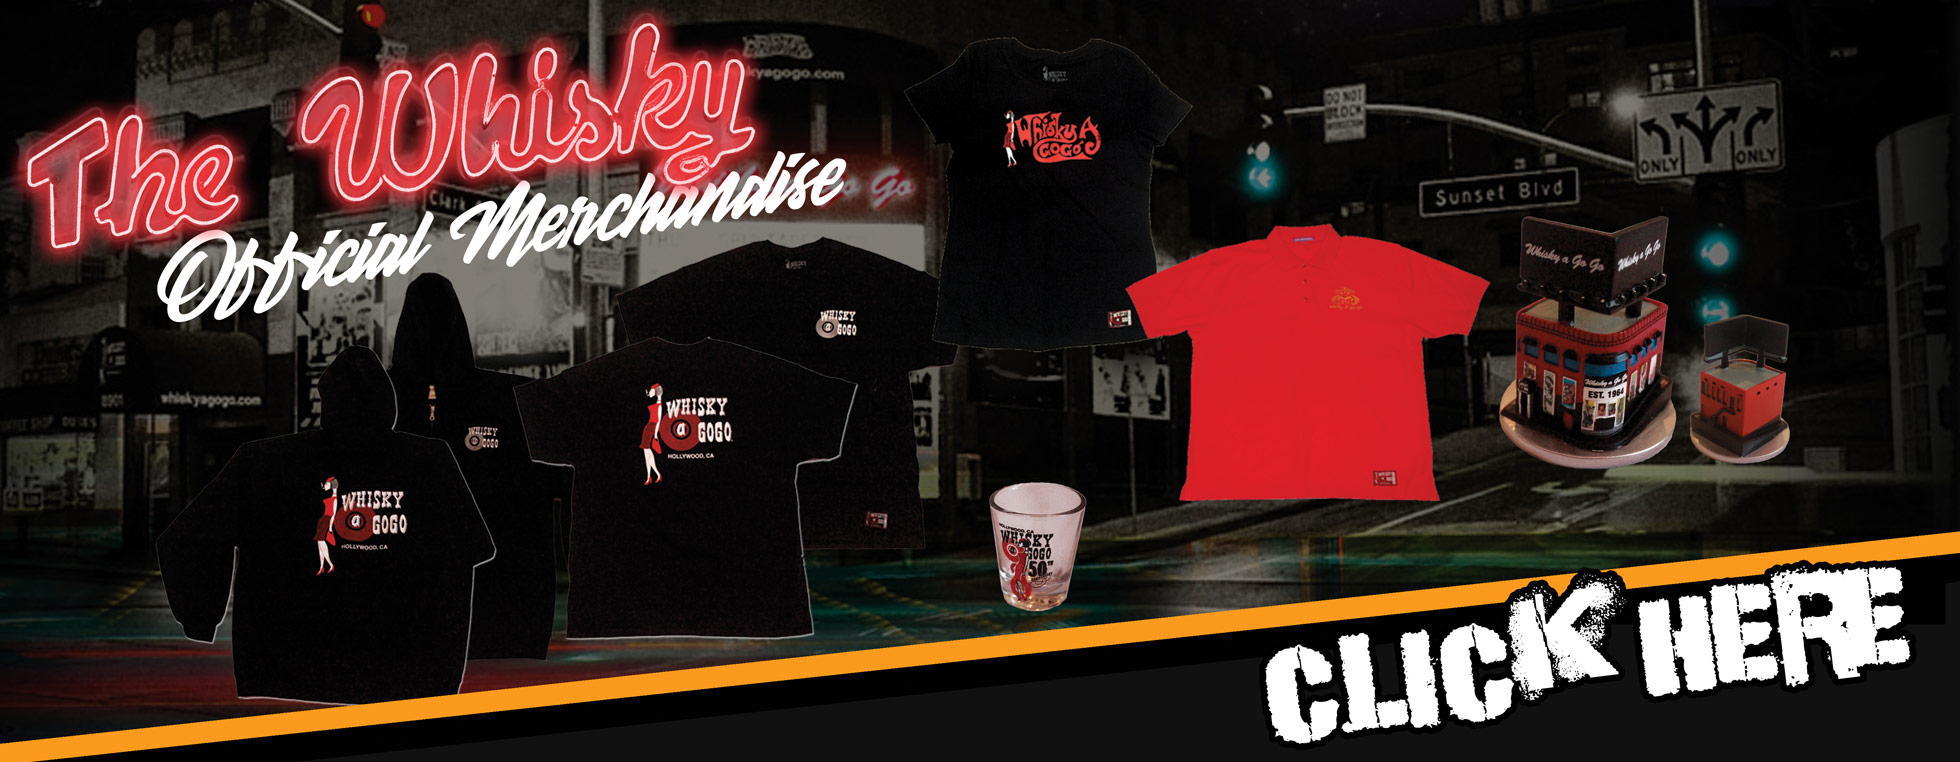 The Whisky Official Merchandise